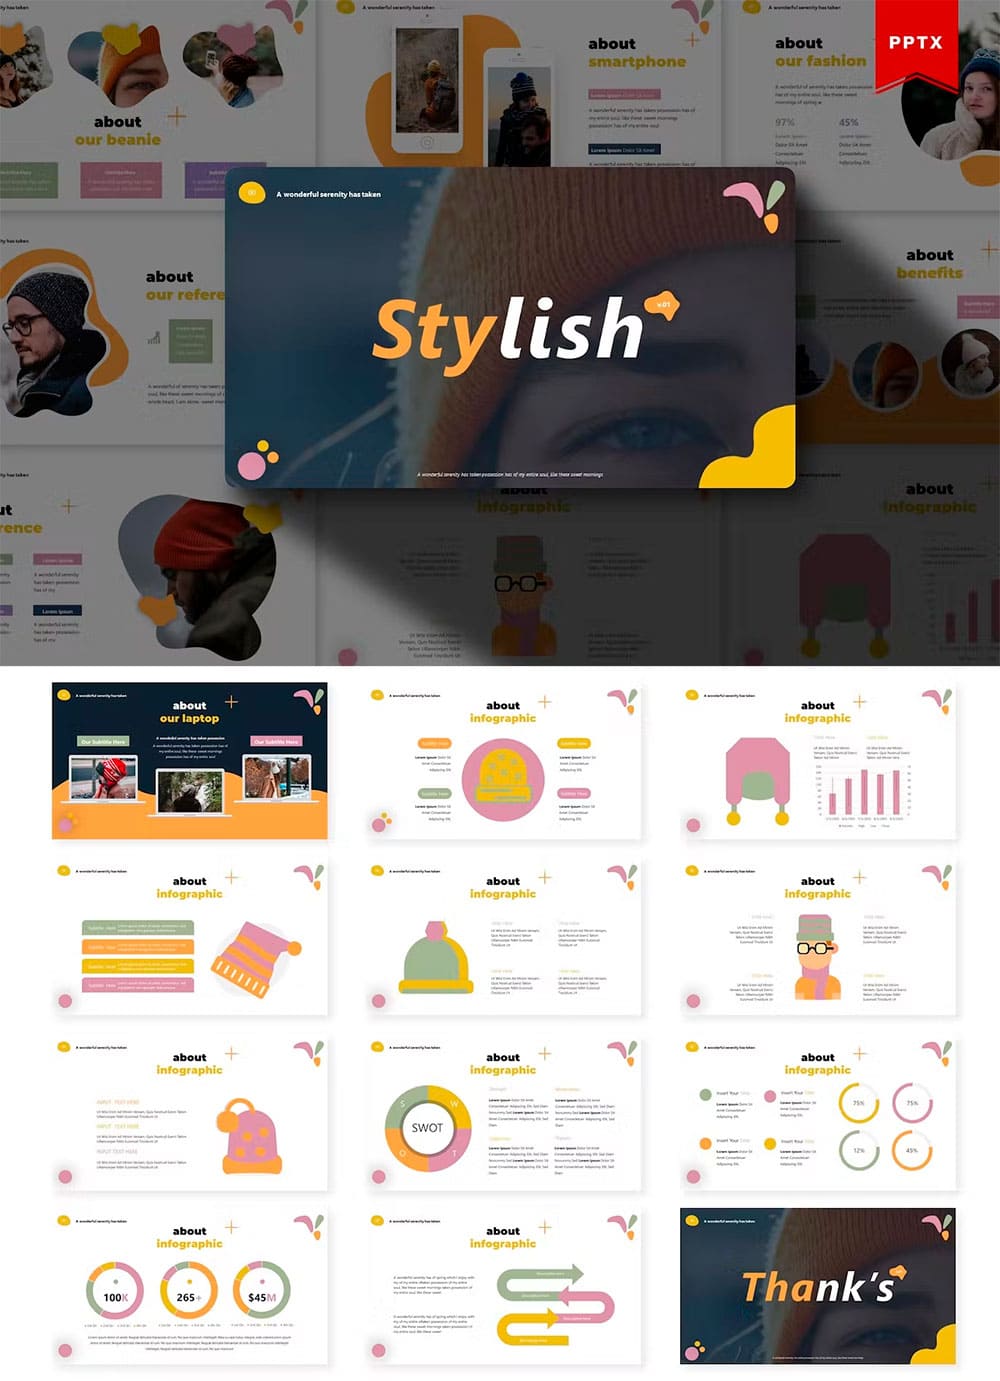 Stylish powerpoint template, picture for pinterest.